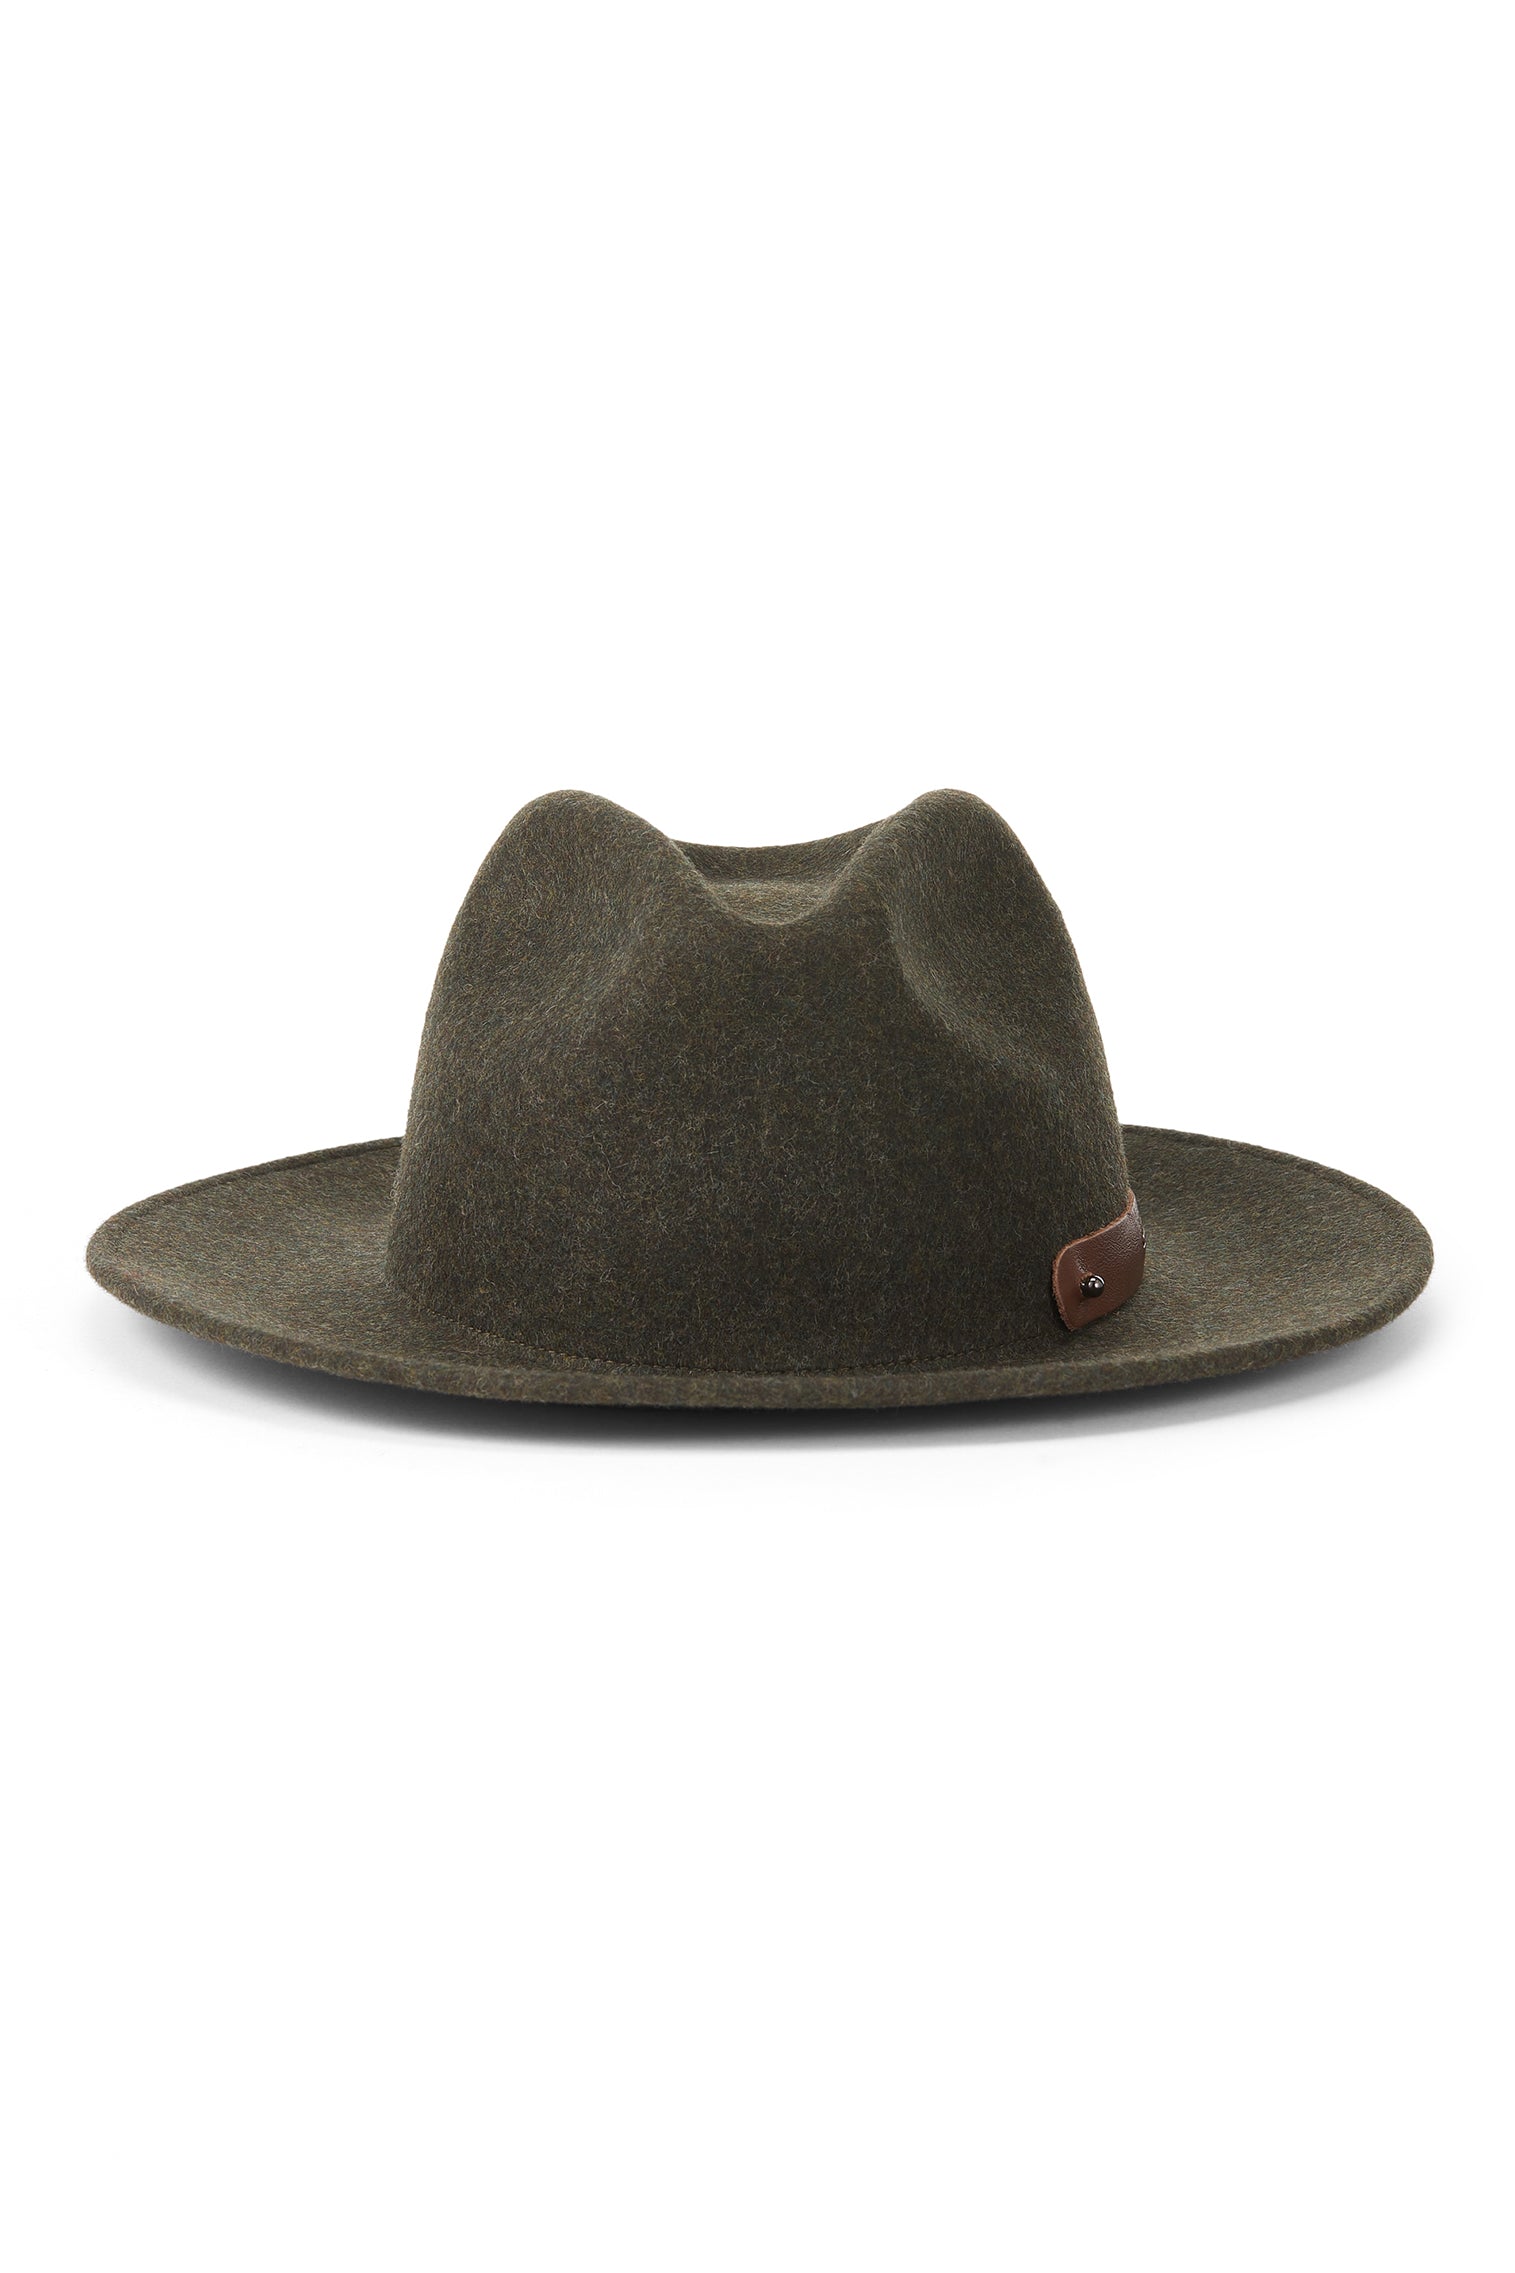 Cheltenham Rollable Trilby - Packable & Rollable Hats - Lock & Co. Hatters London UK